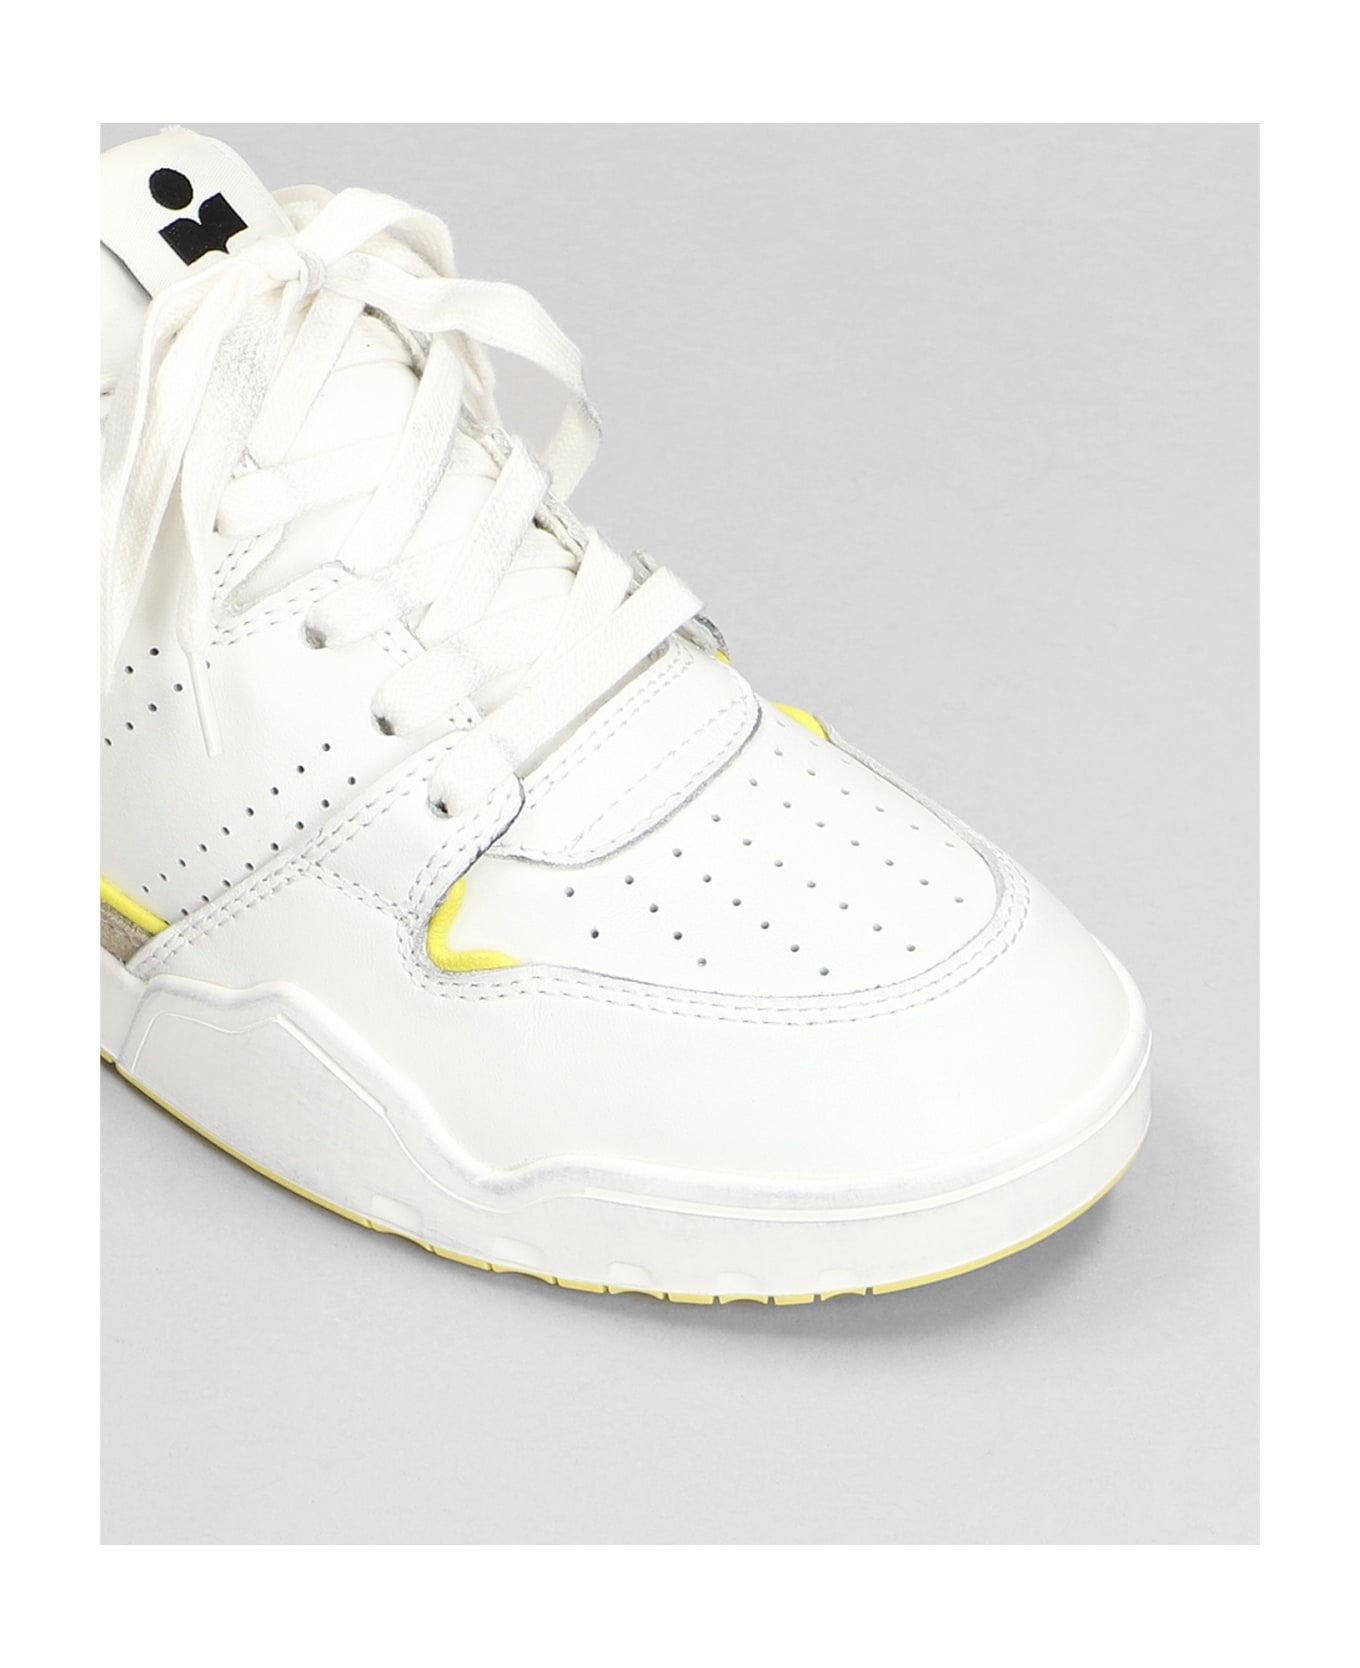 Isabel Marant Emree Sneakers In White Suede And Leather - Liye Light Yellow スニーカー